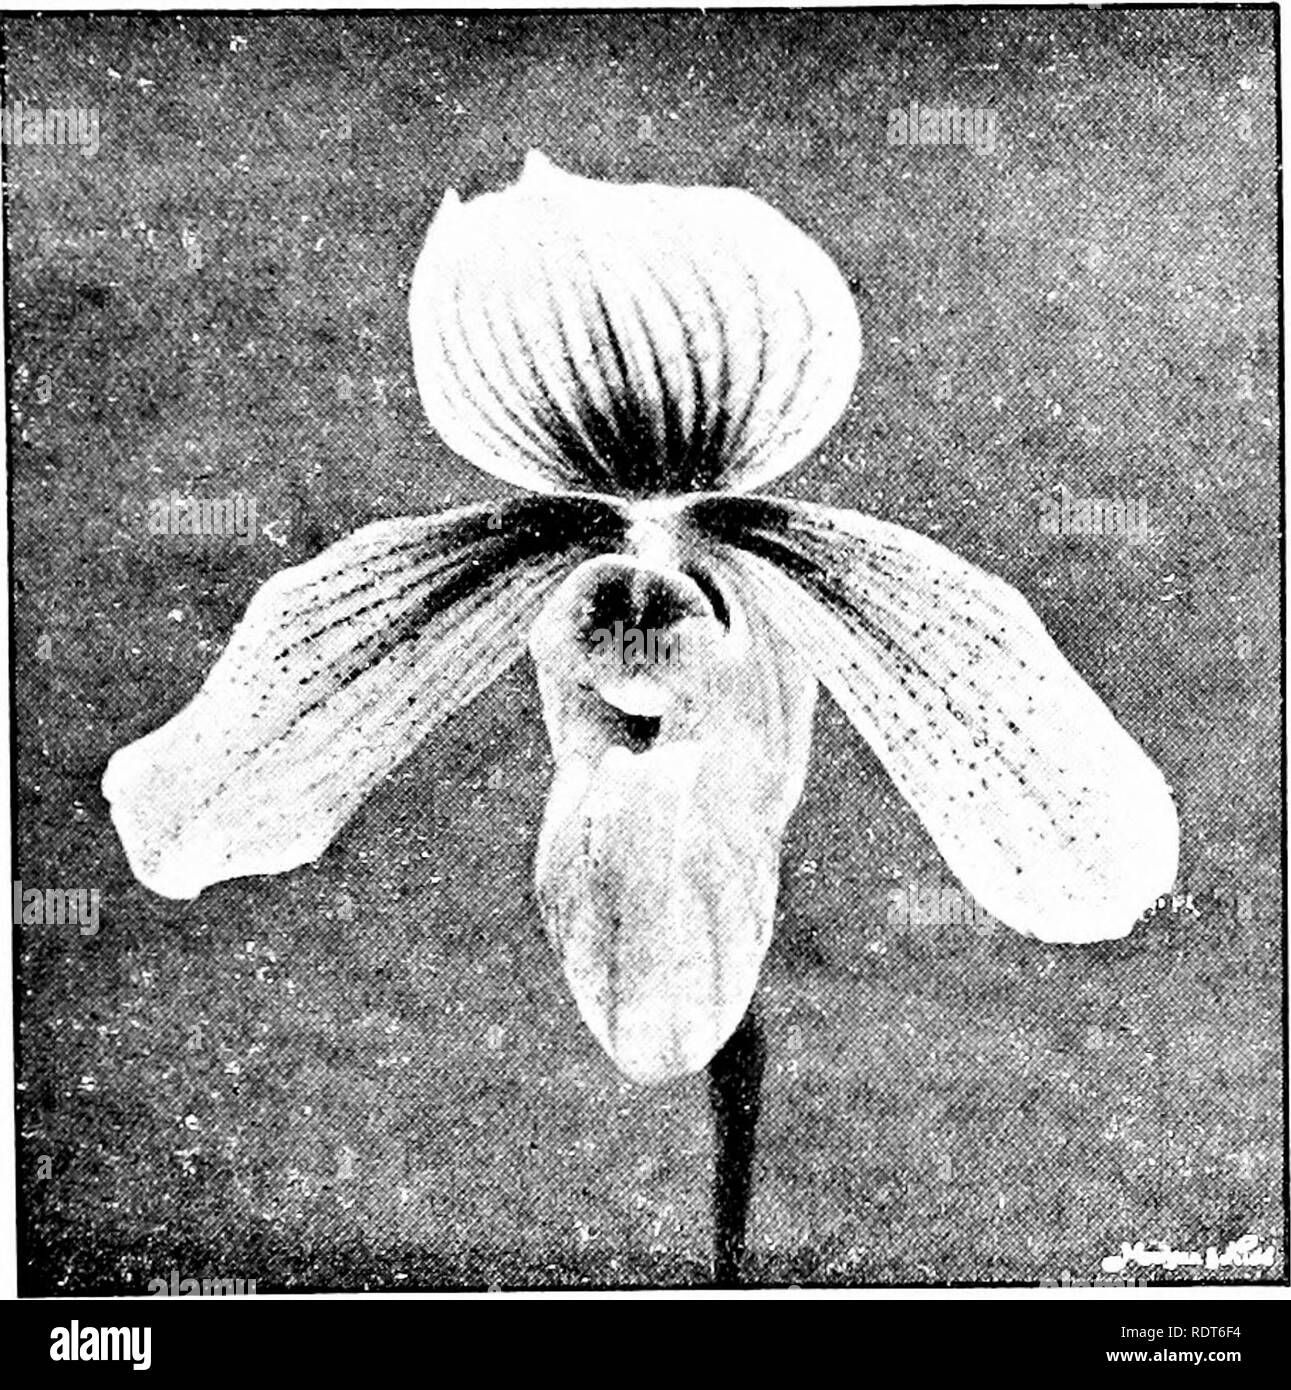 . The orchid stud-book: an enumeration of hybrid orchids of artificial origin, with their parents, raisers, date of first flowering, references to descriptions and figures, and synonymy. With an historical introduction and 120 figures and a chapter on hybridising and raising orchids from seed. Orchids. Part II. THE ORCHID STUD-BOOK. 207 C. X Sophie, G.C. 1902, ii. 106; O.R. 1902, 274; 1903, 63. C. x Desdemona, Gard. 1903, ii. Oct. 31, Suppl. vii.—Low. 556. P. X Spicero-niveuin (niveum x Spicerianum).—Sander, 1893. C. x Spicero-niveum, R. H. Meas. Cyp. ed. 2, 100. C. x Isabella, Anier, G. March Stock Photo